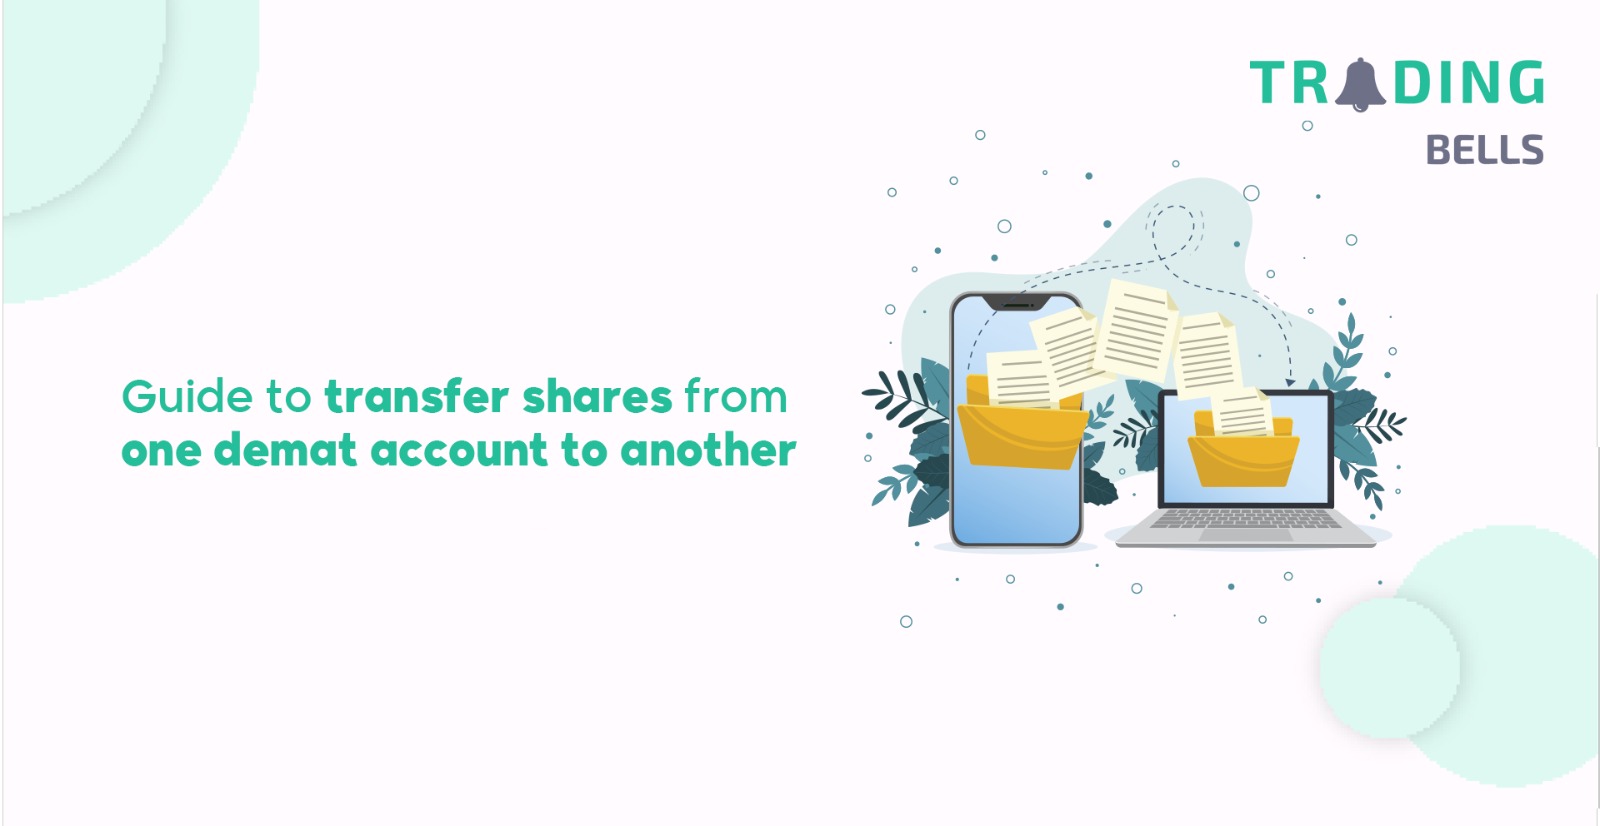 Transfering shares from one demat account to another